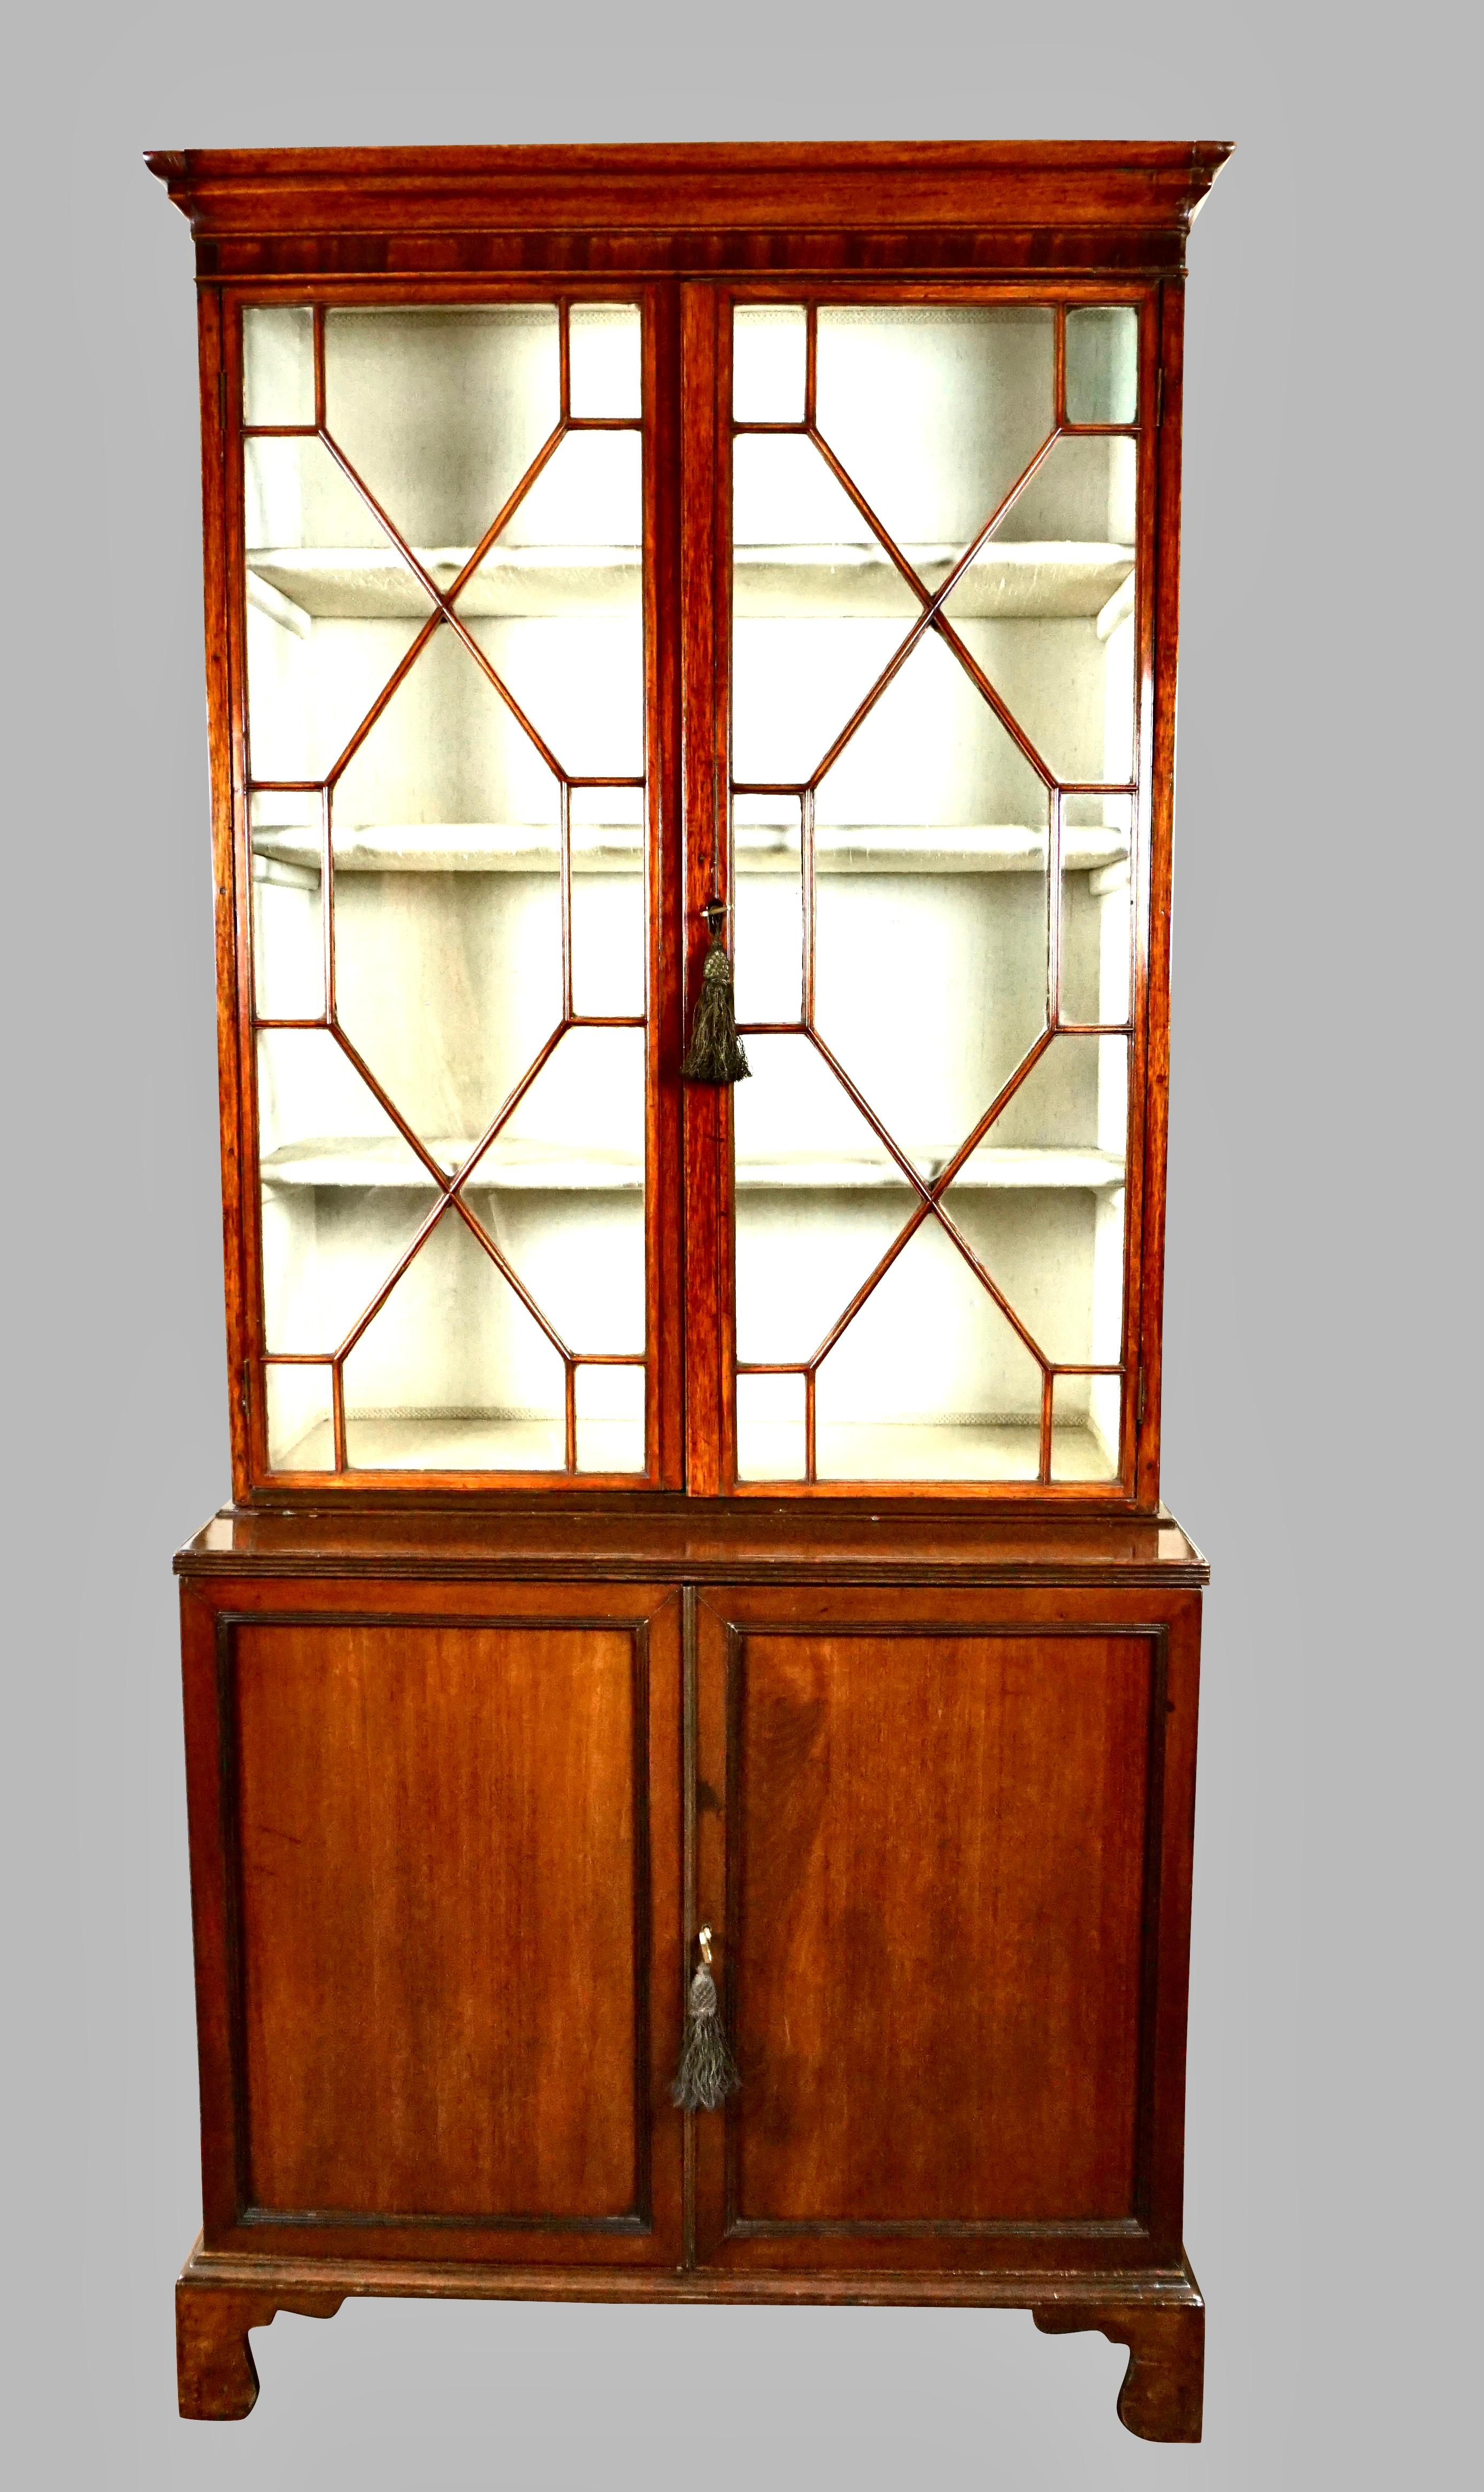 An English Georgian period mahogany bookcase, the glazed upper section now lined in fabric, above 2 cabinet doors, all supported on bracket feet. A simple but very elegant and useful piece of period English furniture in attractive overall condition.